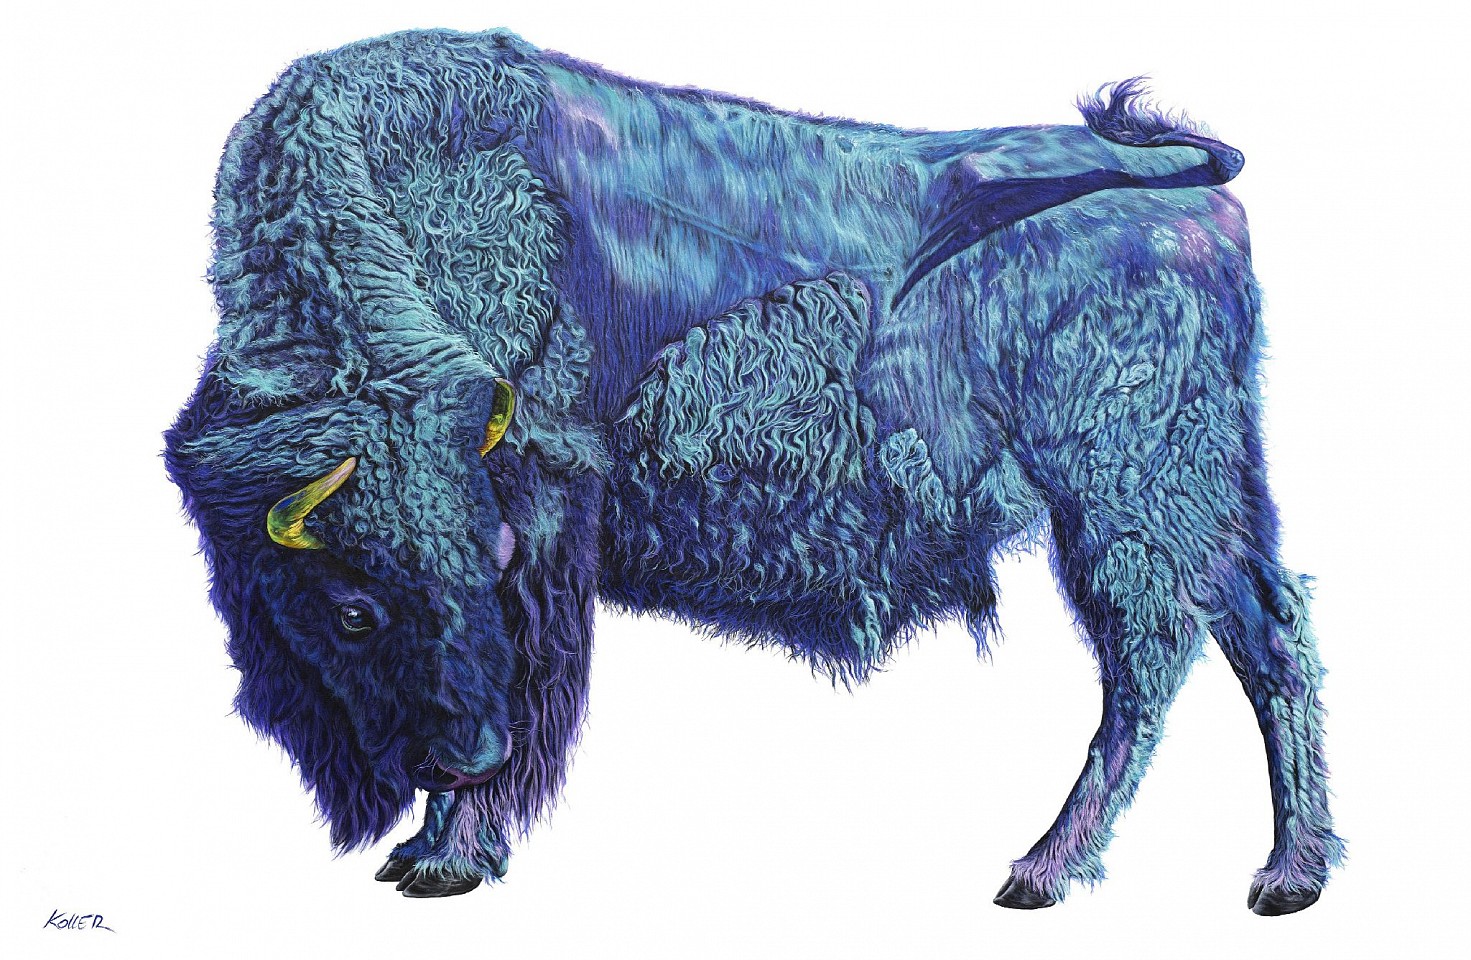 Helmut Koller, Bison on White, 2019
acrylic on canvas, 79 7/8 x 112 1/8 in. (203 x 285 cm)
HK230302